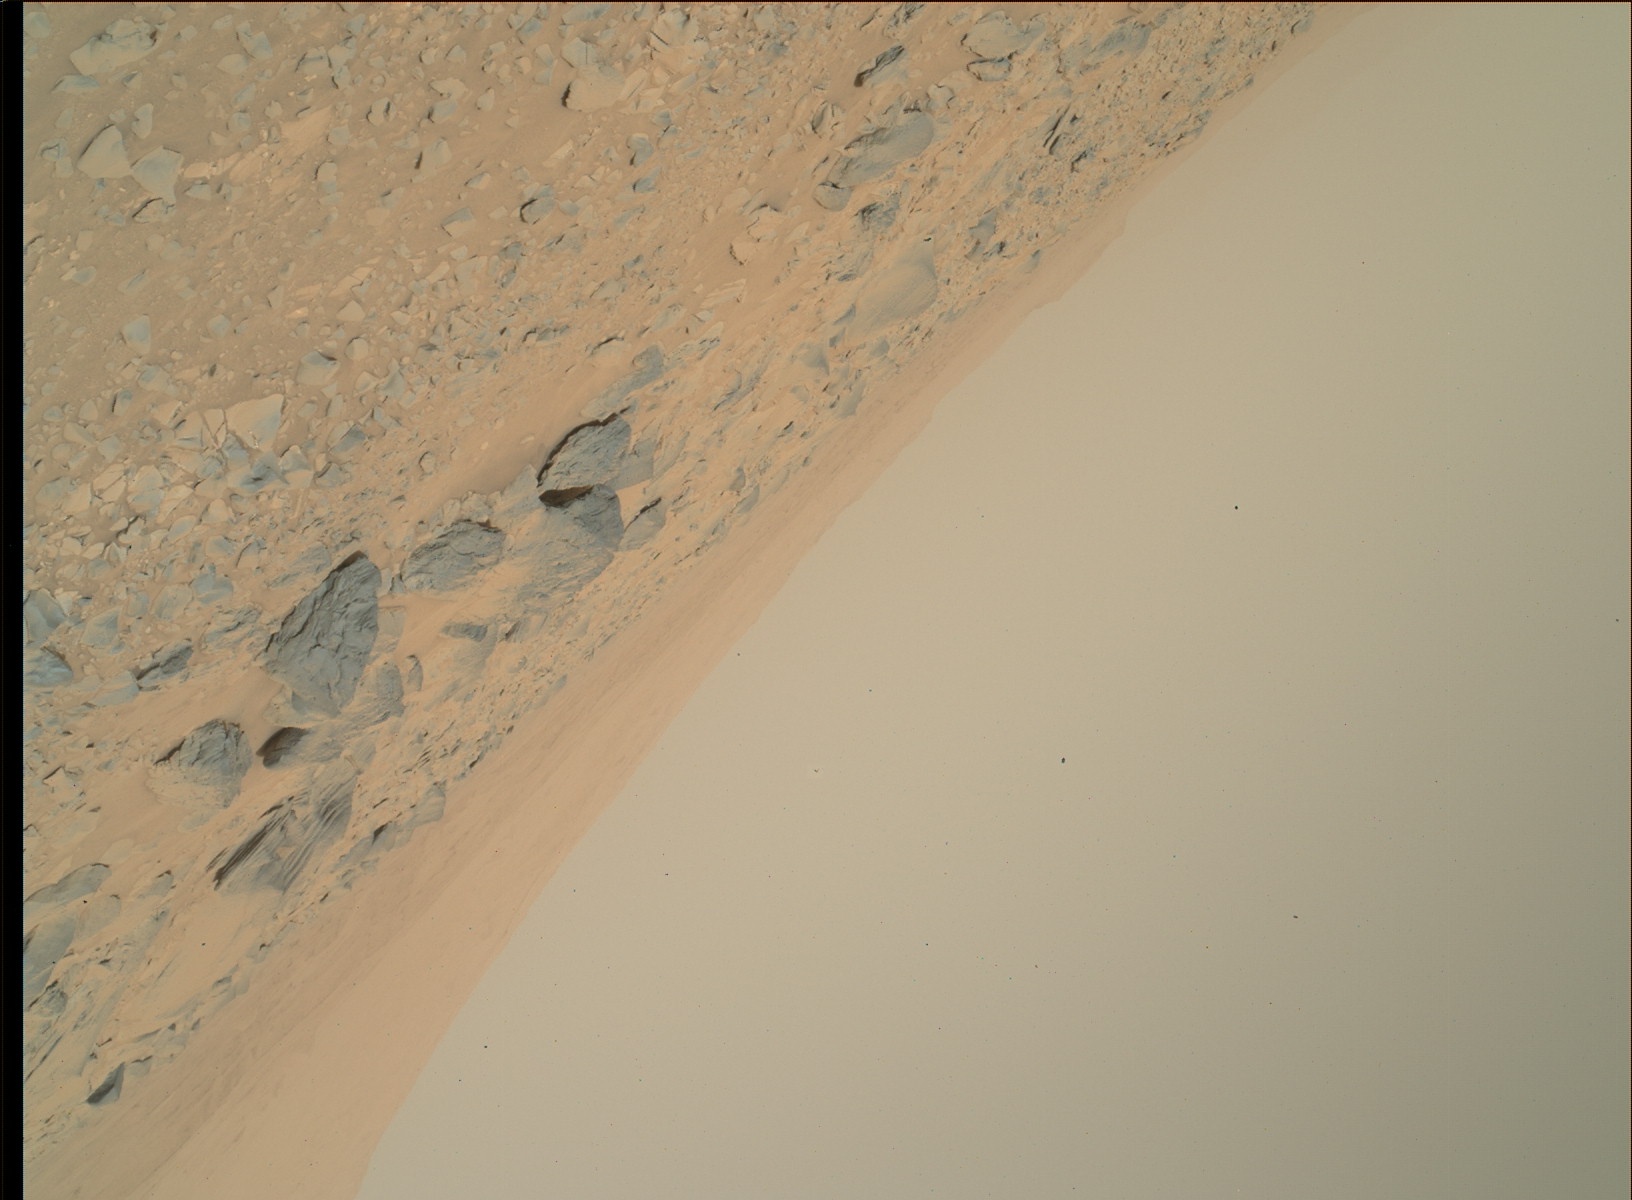 Nasa's Mars rover Curiosity acquired this image using its Mars Hand Lens Imager (MAHLI) on Sol 717